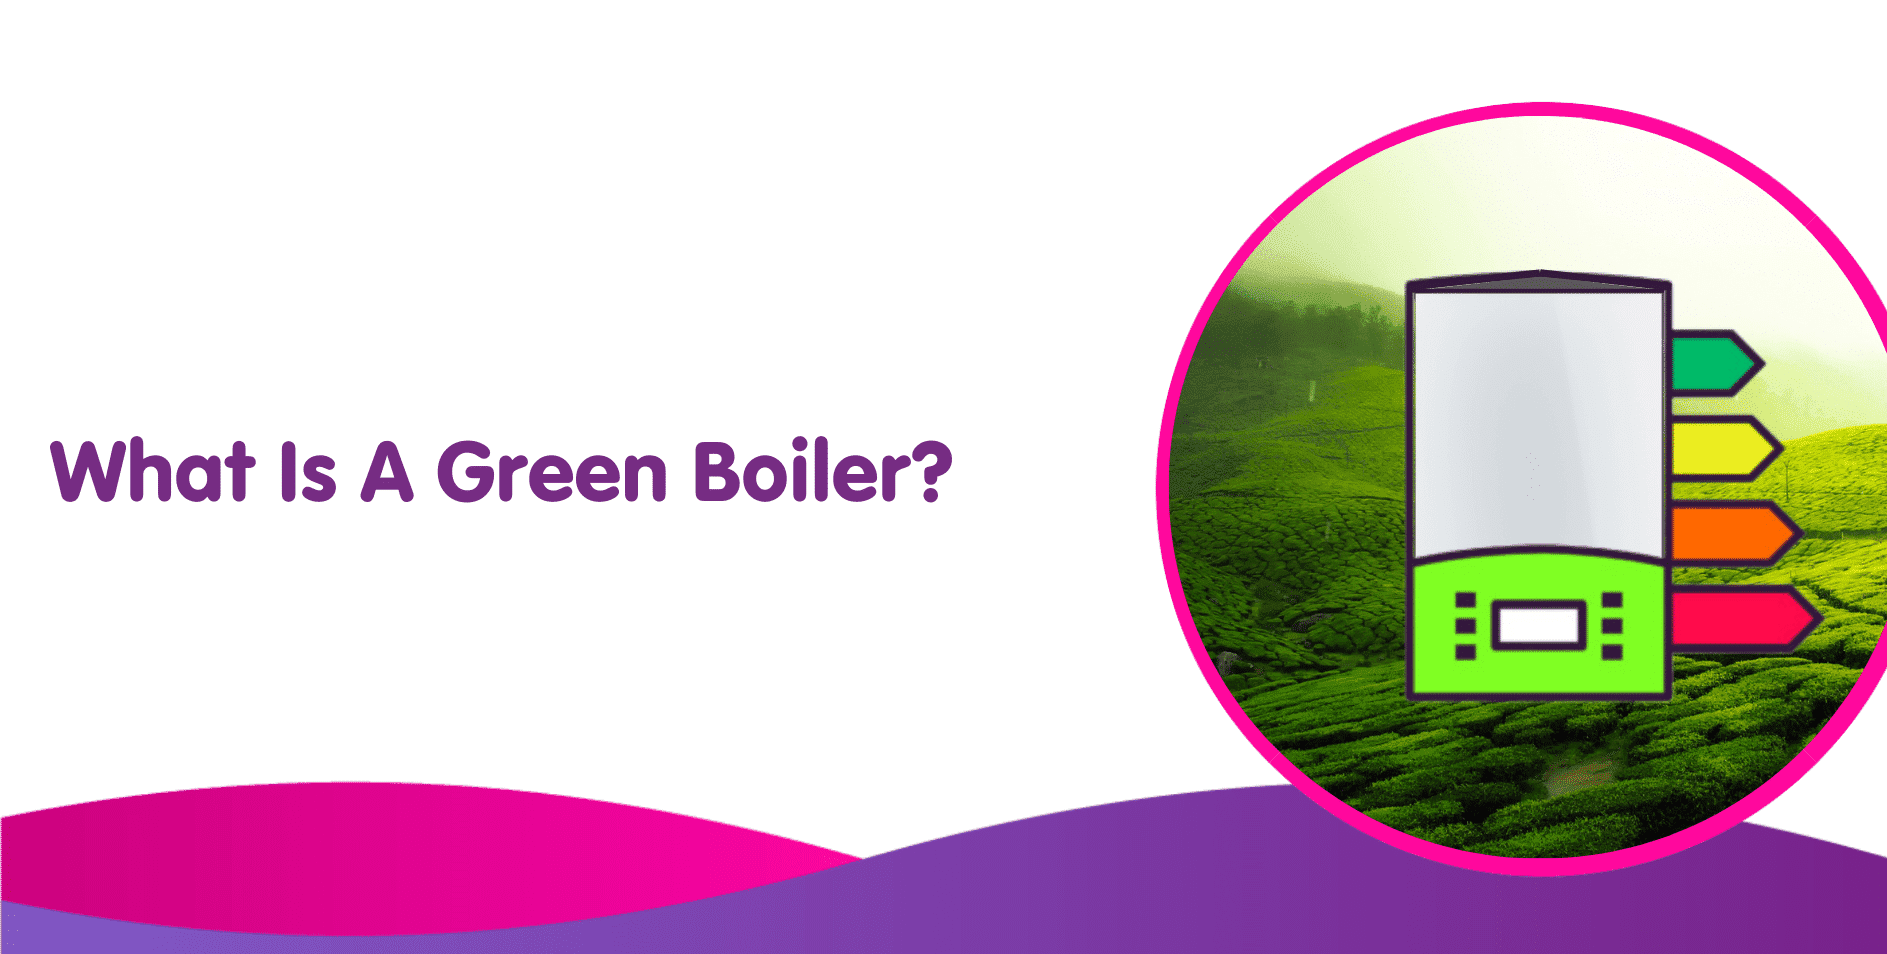 What Is A Green Boiler?